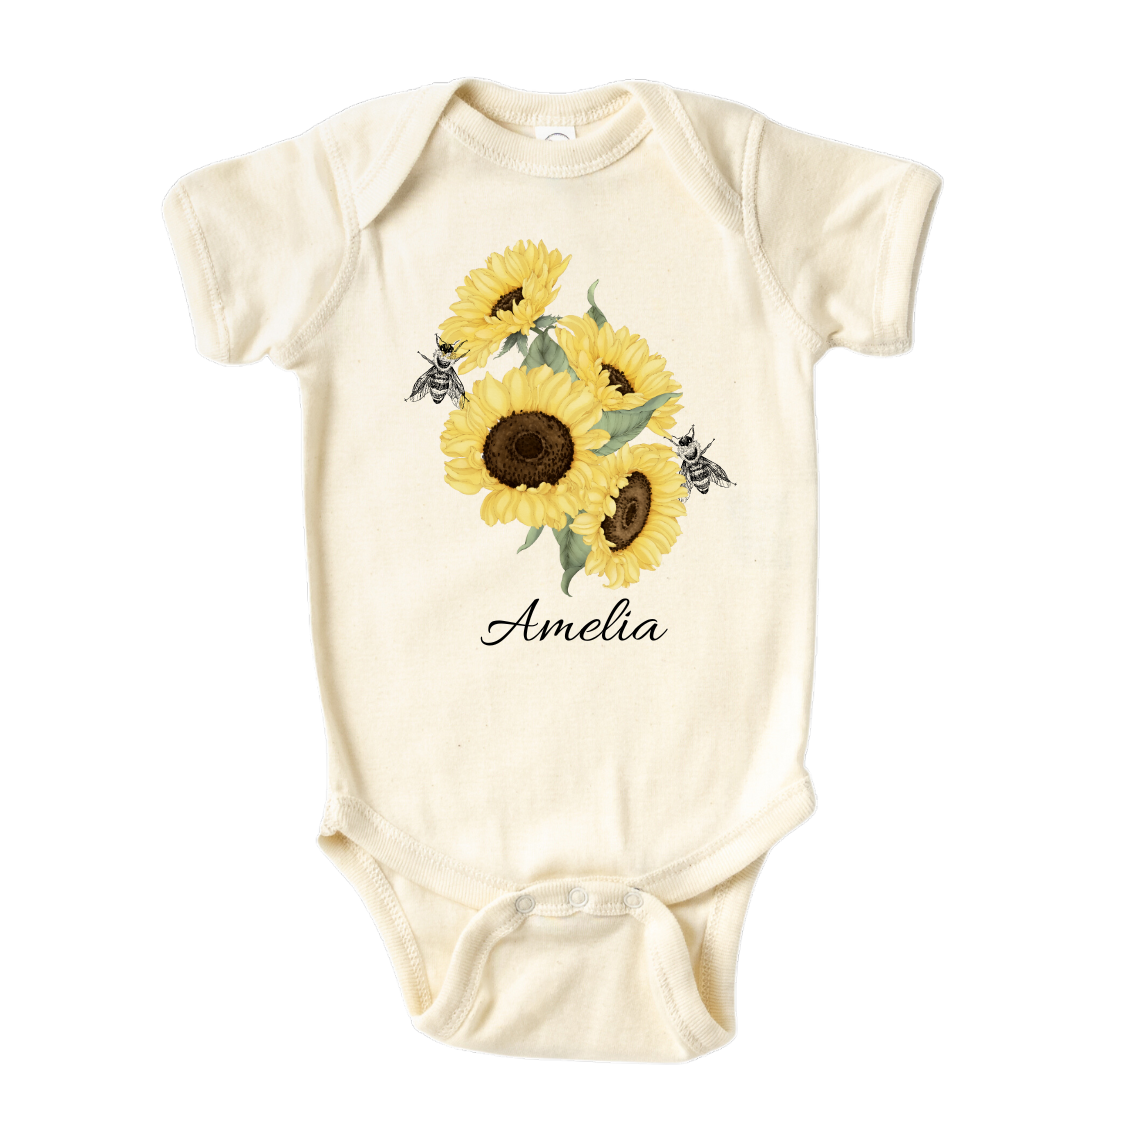 Baby Onesie A kid's t-shirt with a cute printed graphic of sunflowers and bees, personalized with a customized name. This delightful tee is stylish, comfortable, and made from high-quality materials. 